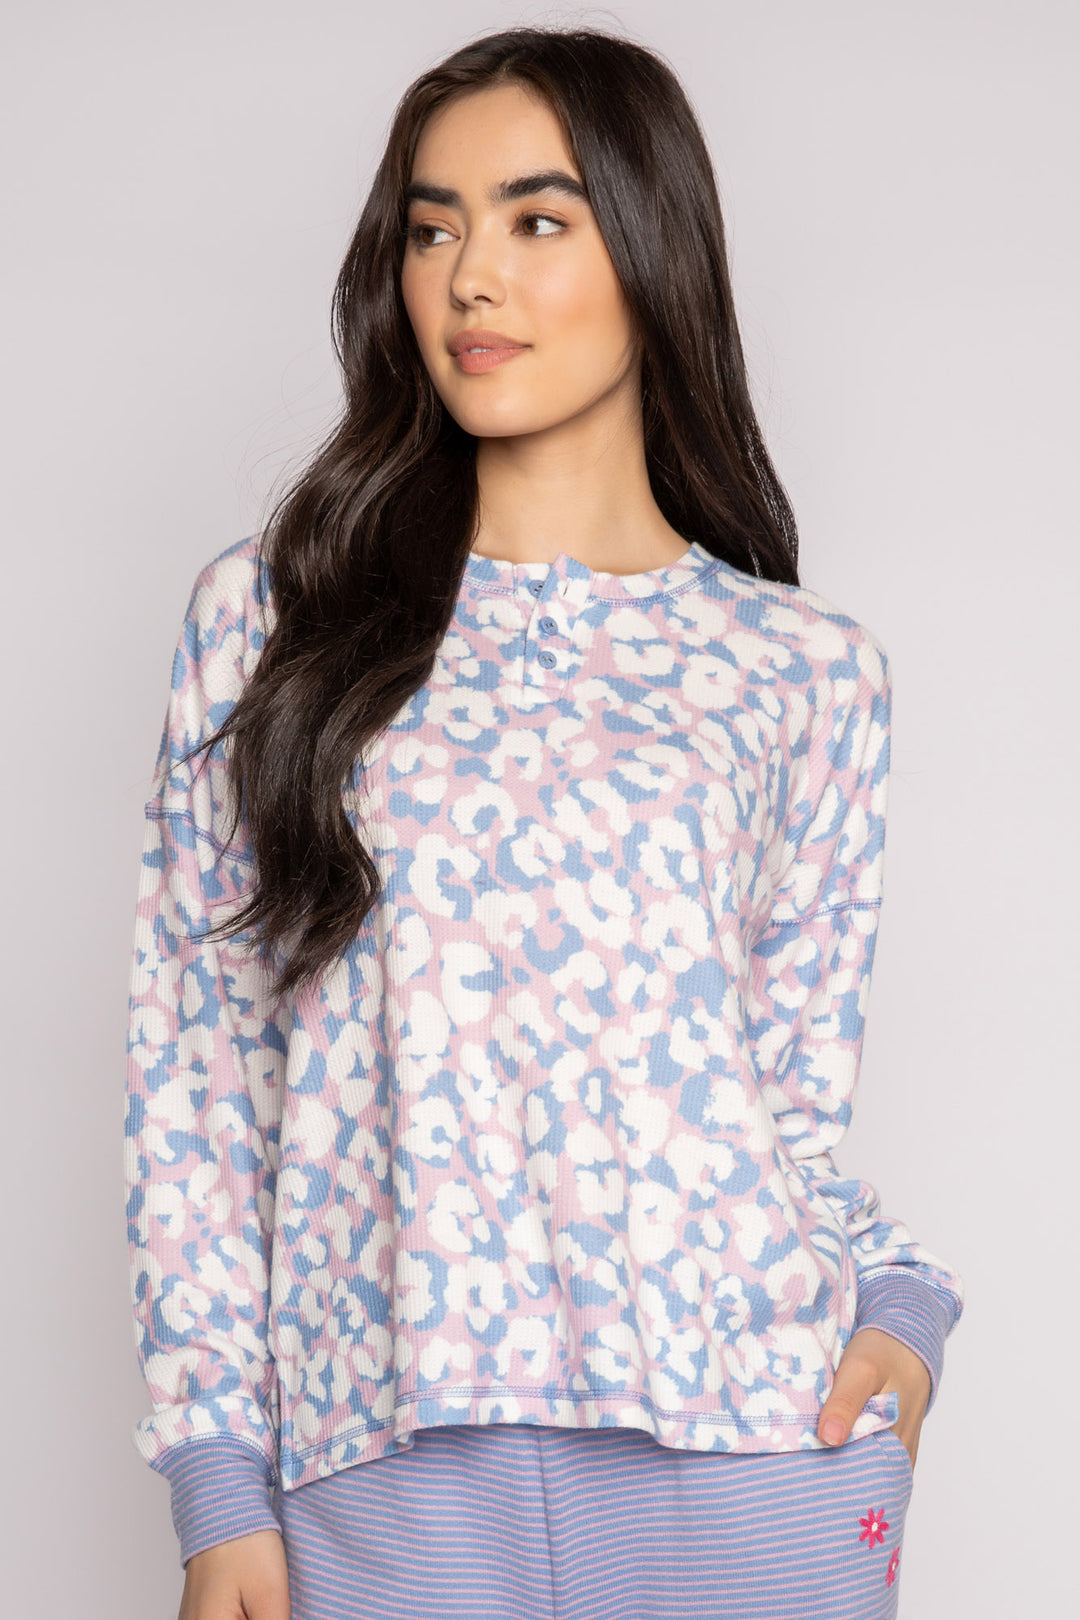 Brushed knit Henley pajama top in ivory-blue-lilac leopard print. Mini striped sleeve cuffs. (7231874957412)